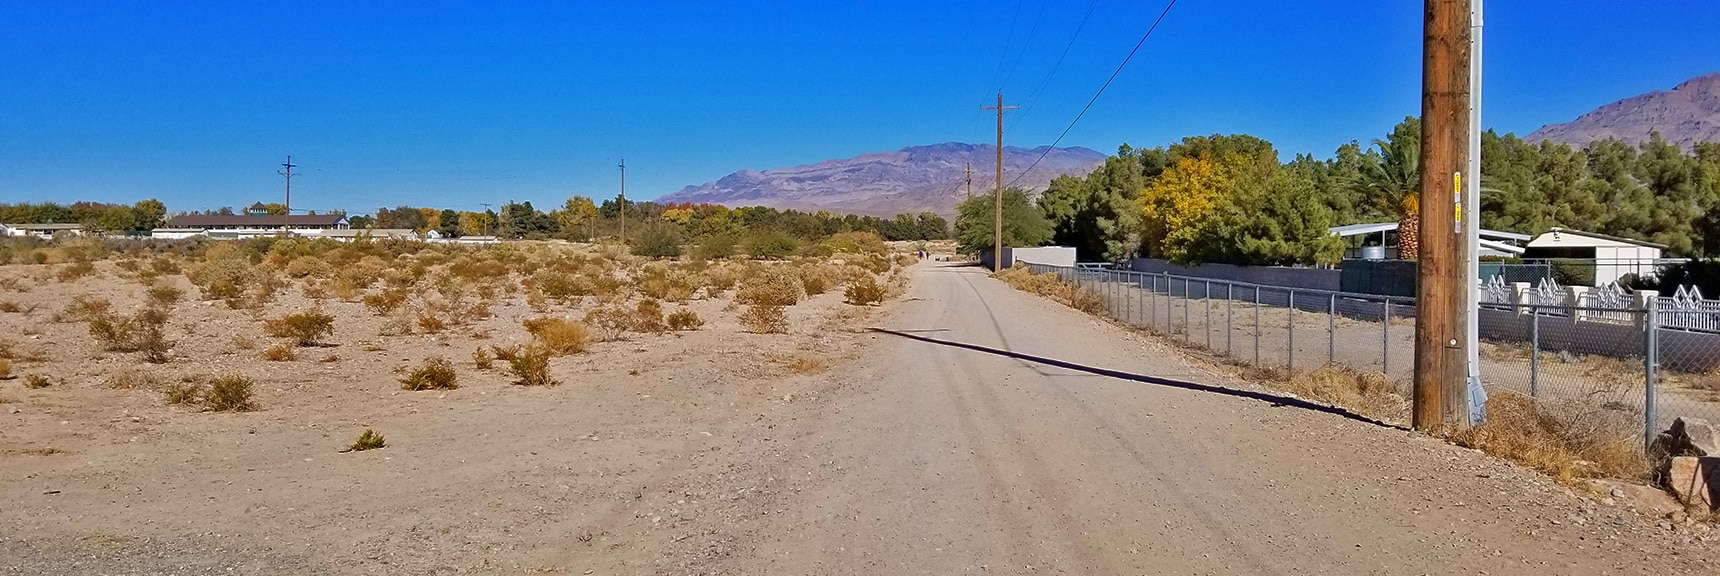 Extensive Bike and Hiking Trail Network South and East of Floyd Lamb Park | Centennial Hills Mountain Bike Conditioning Adventure Loop, Las Vegas, Nevada